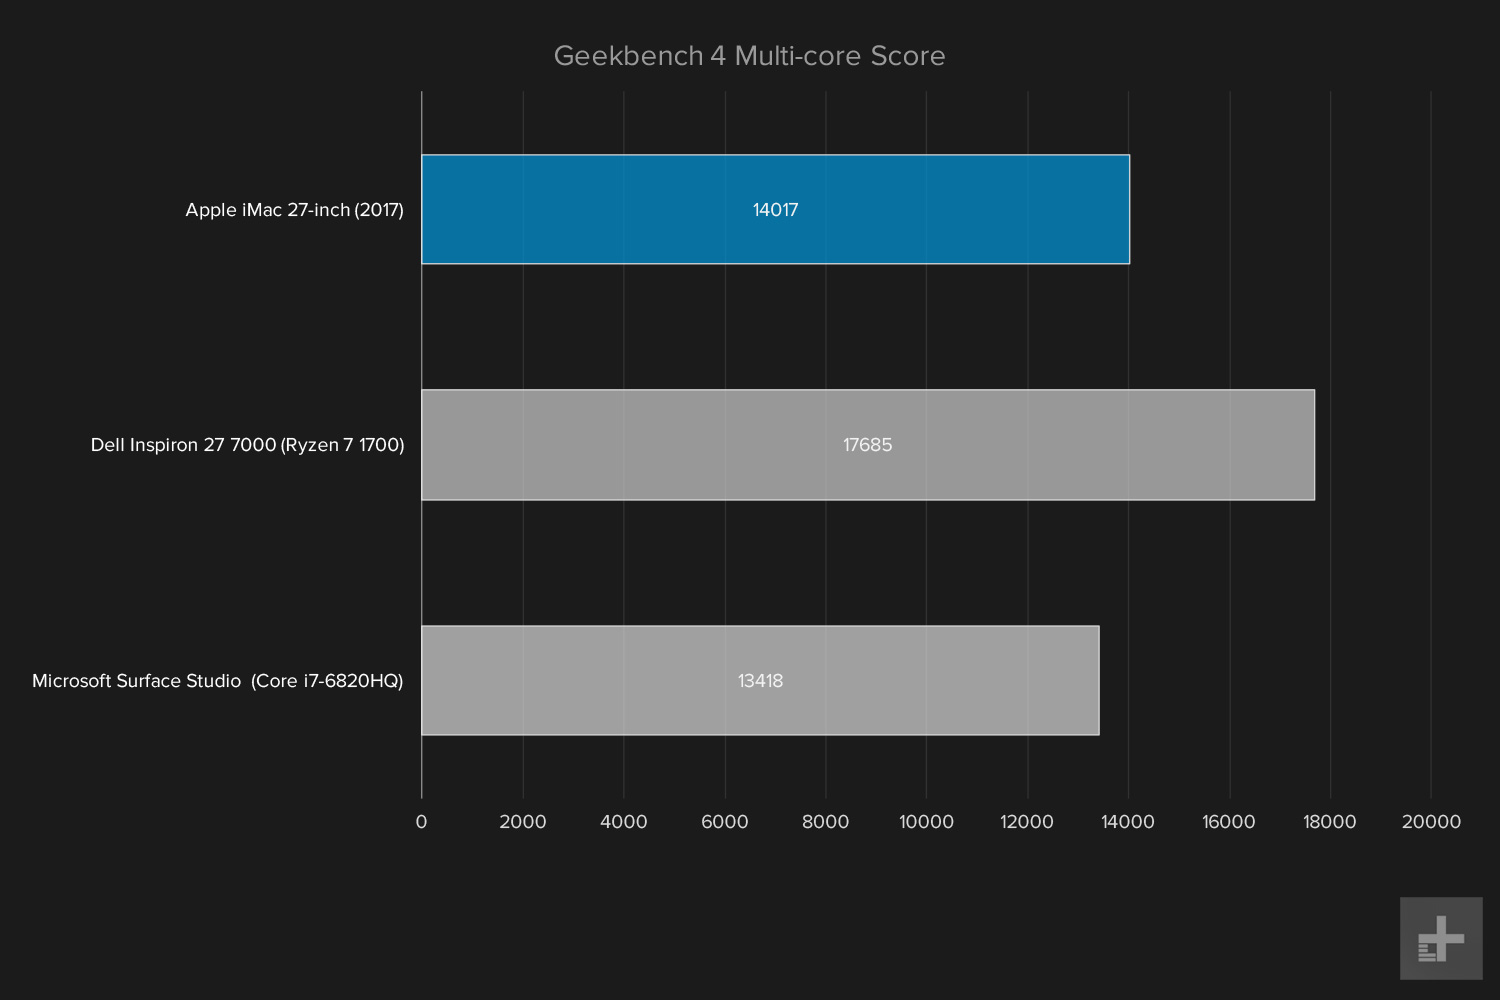 apple imac with retina display review 2017 graph geekbench multi